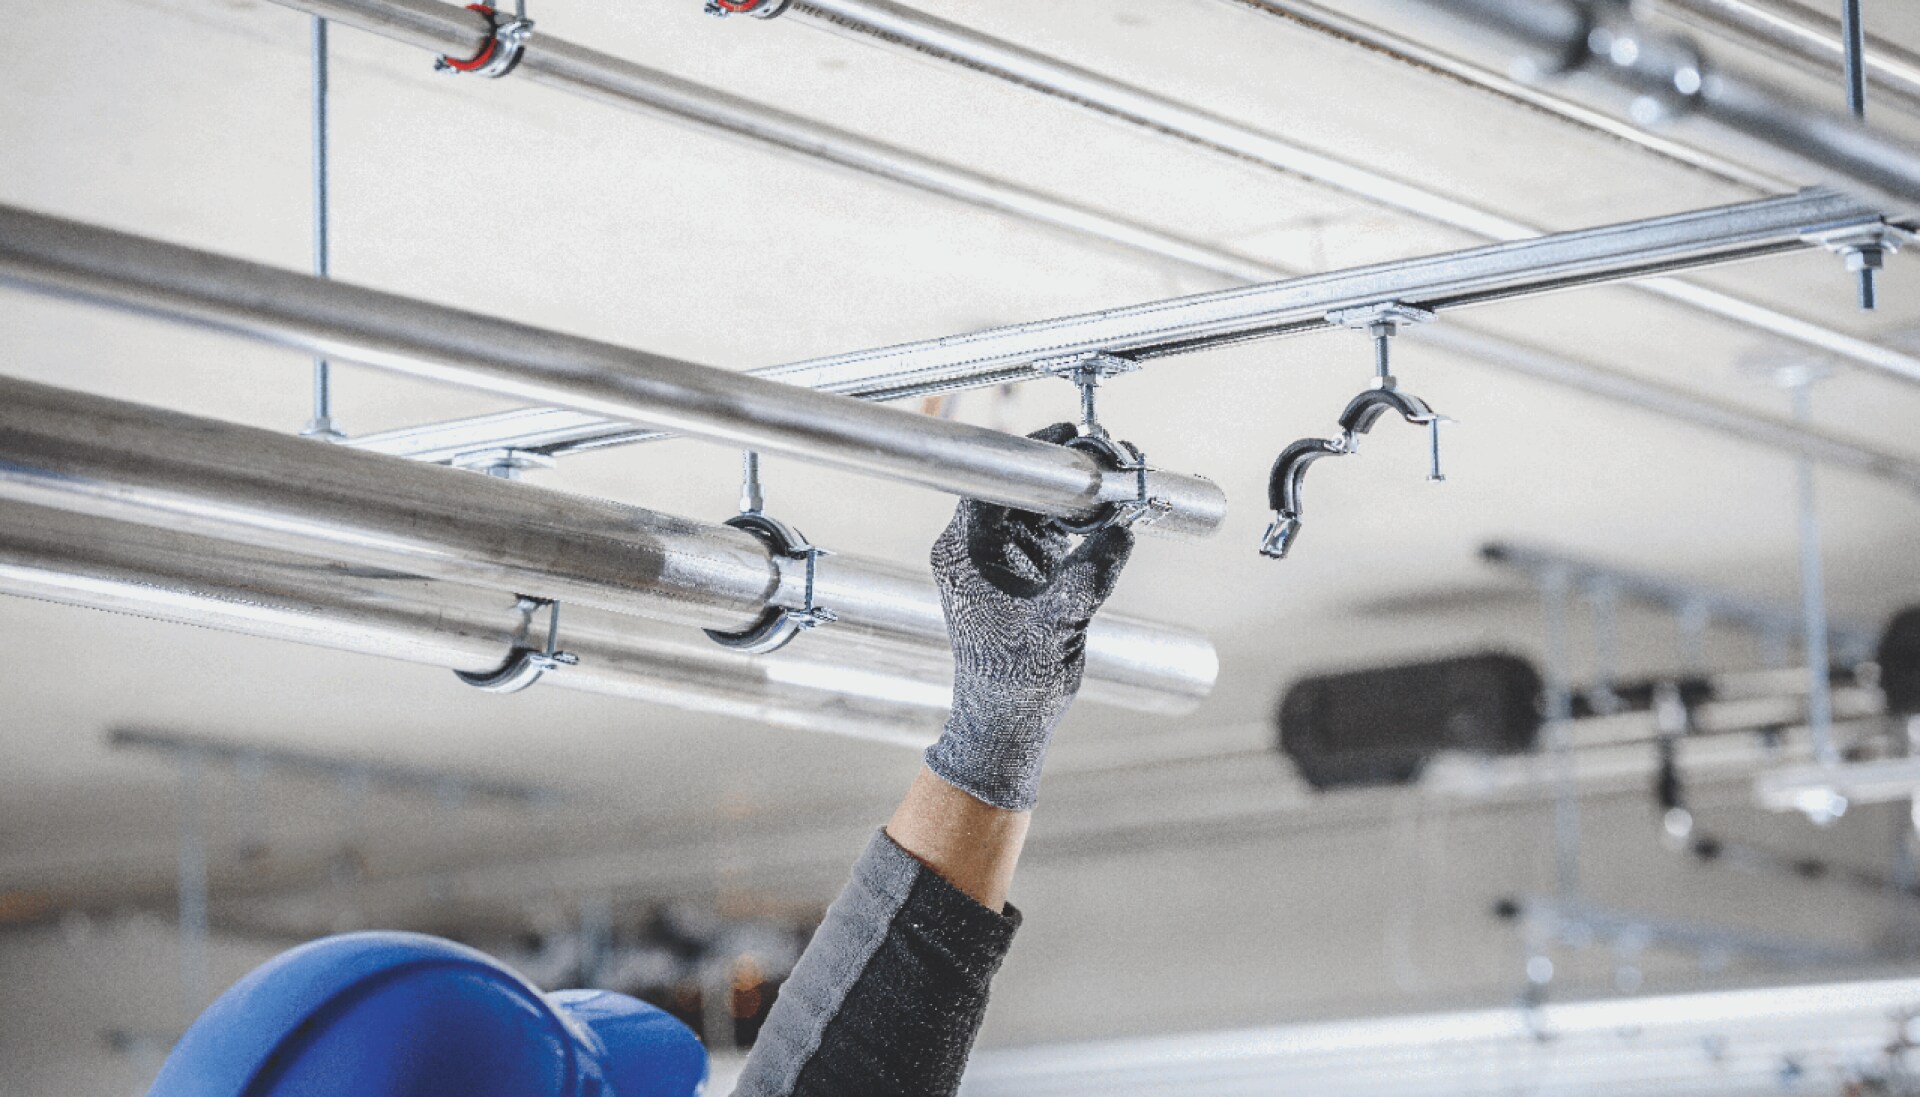 A metal rail being fitted to a ceiling